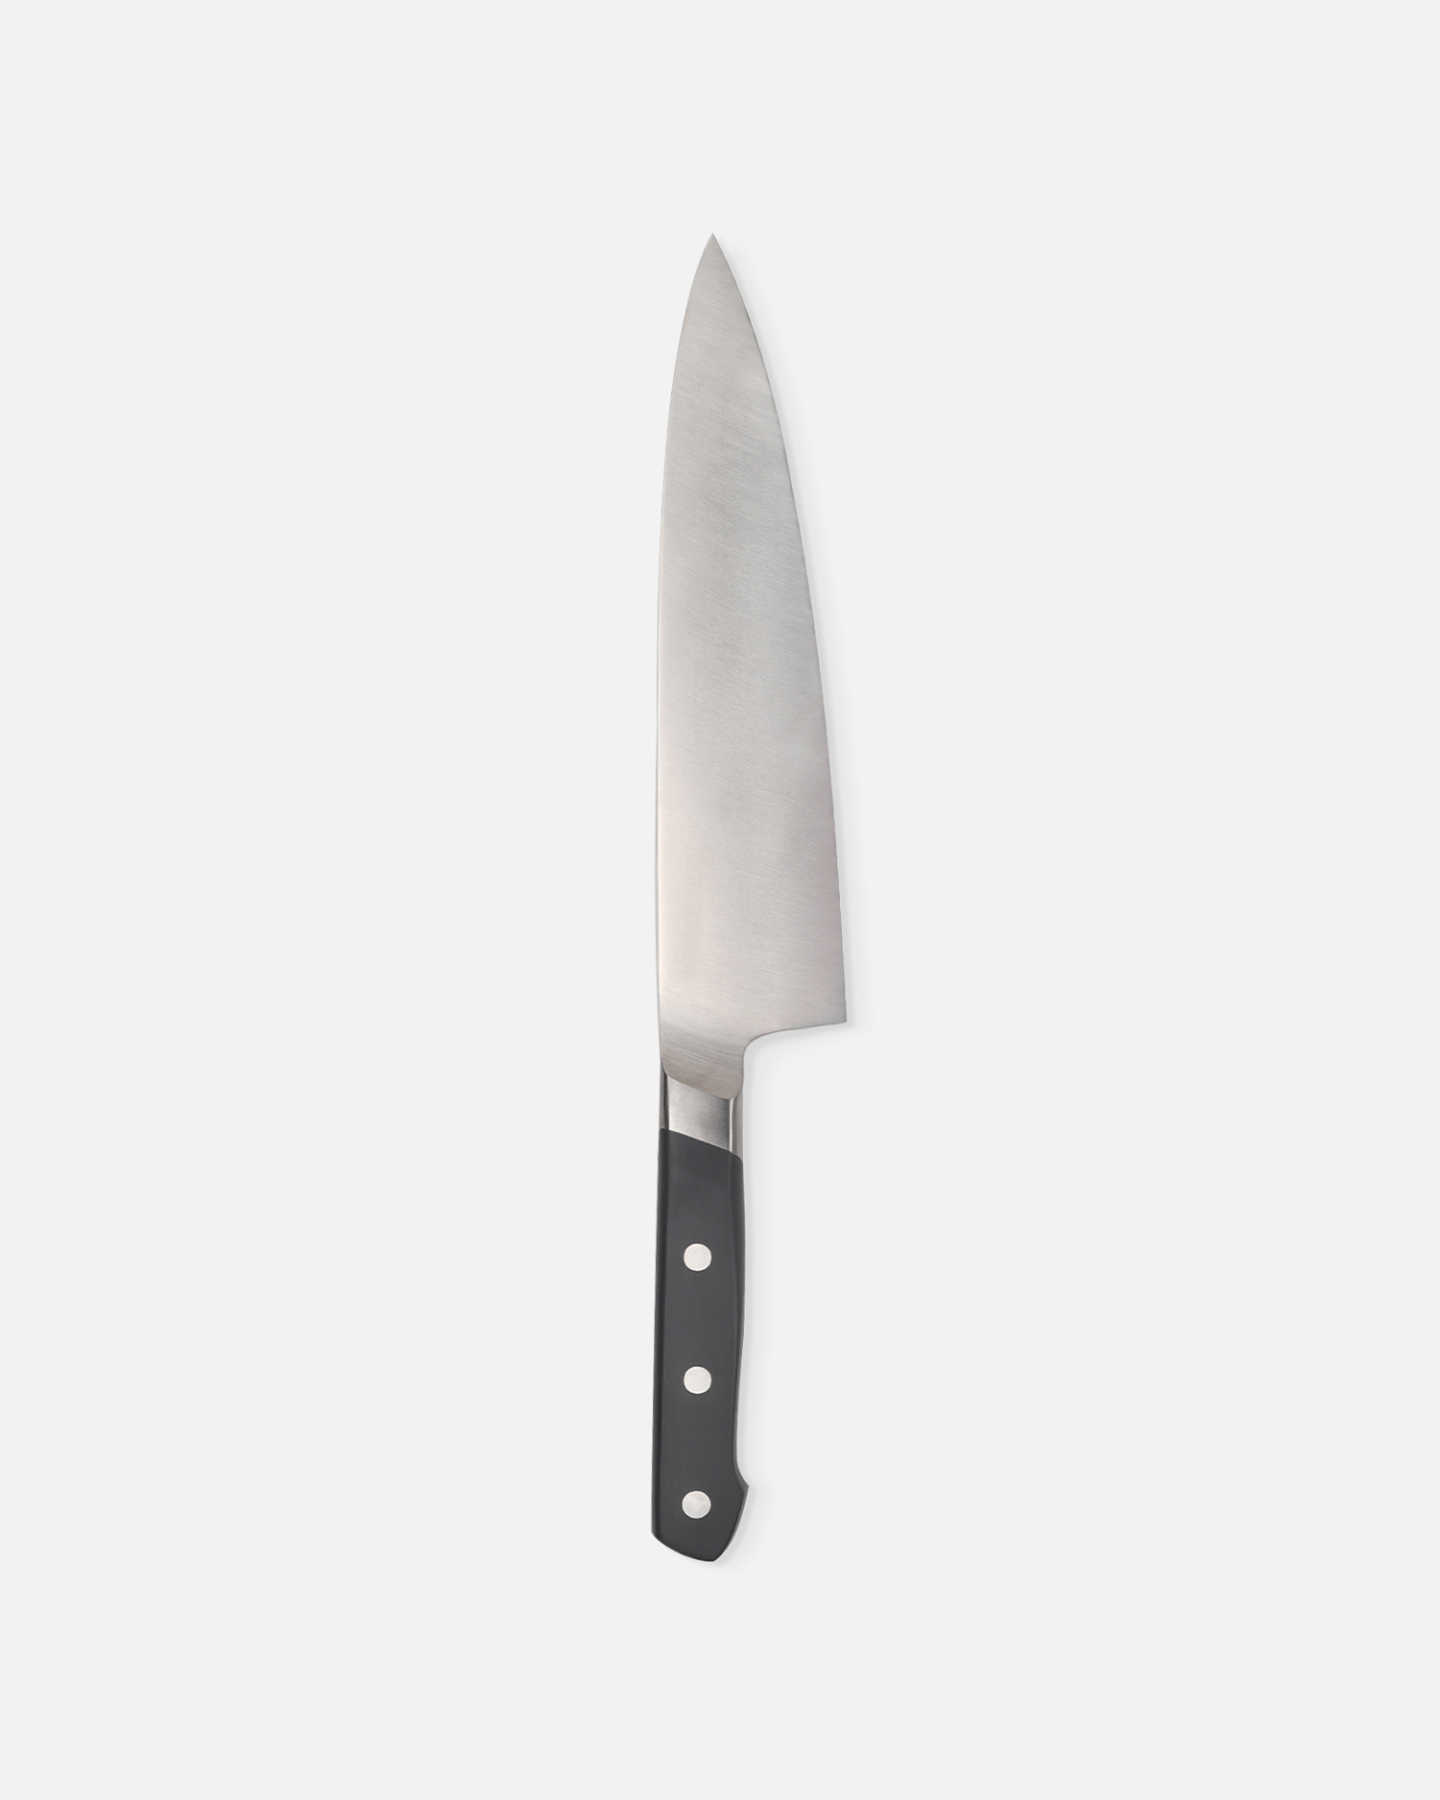 Japanese High-Carbon Steel Knife Collection - Black